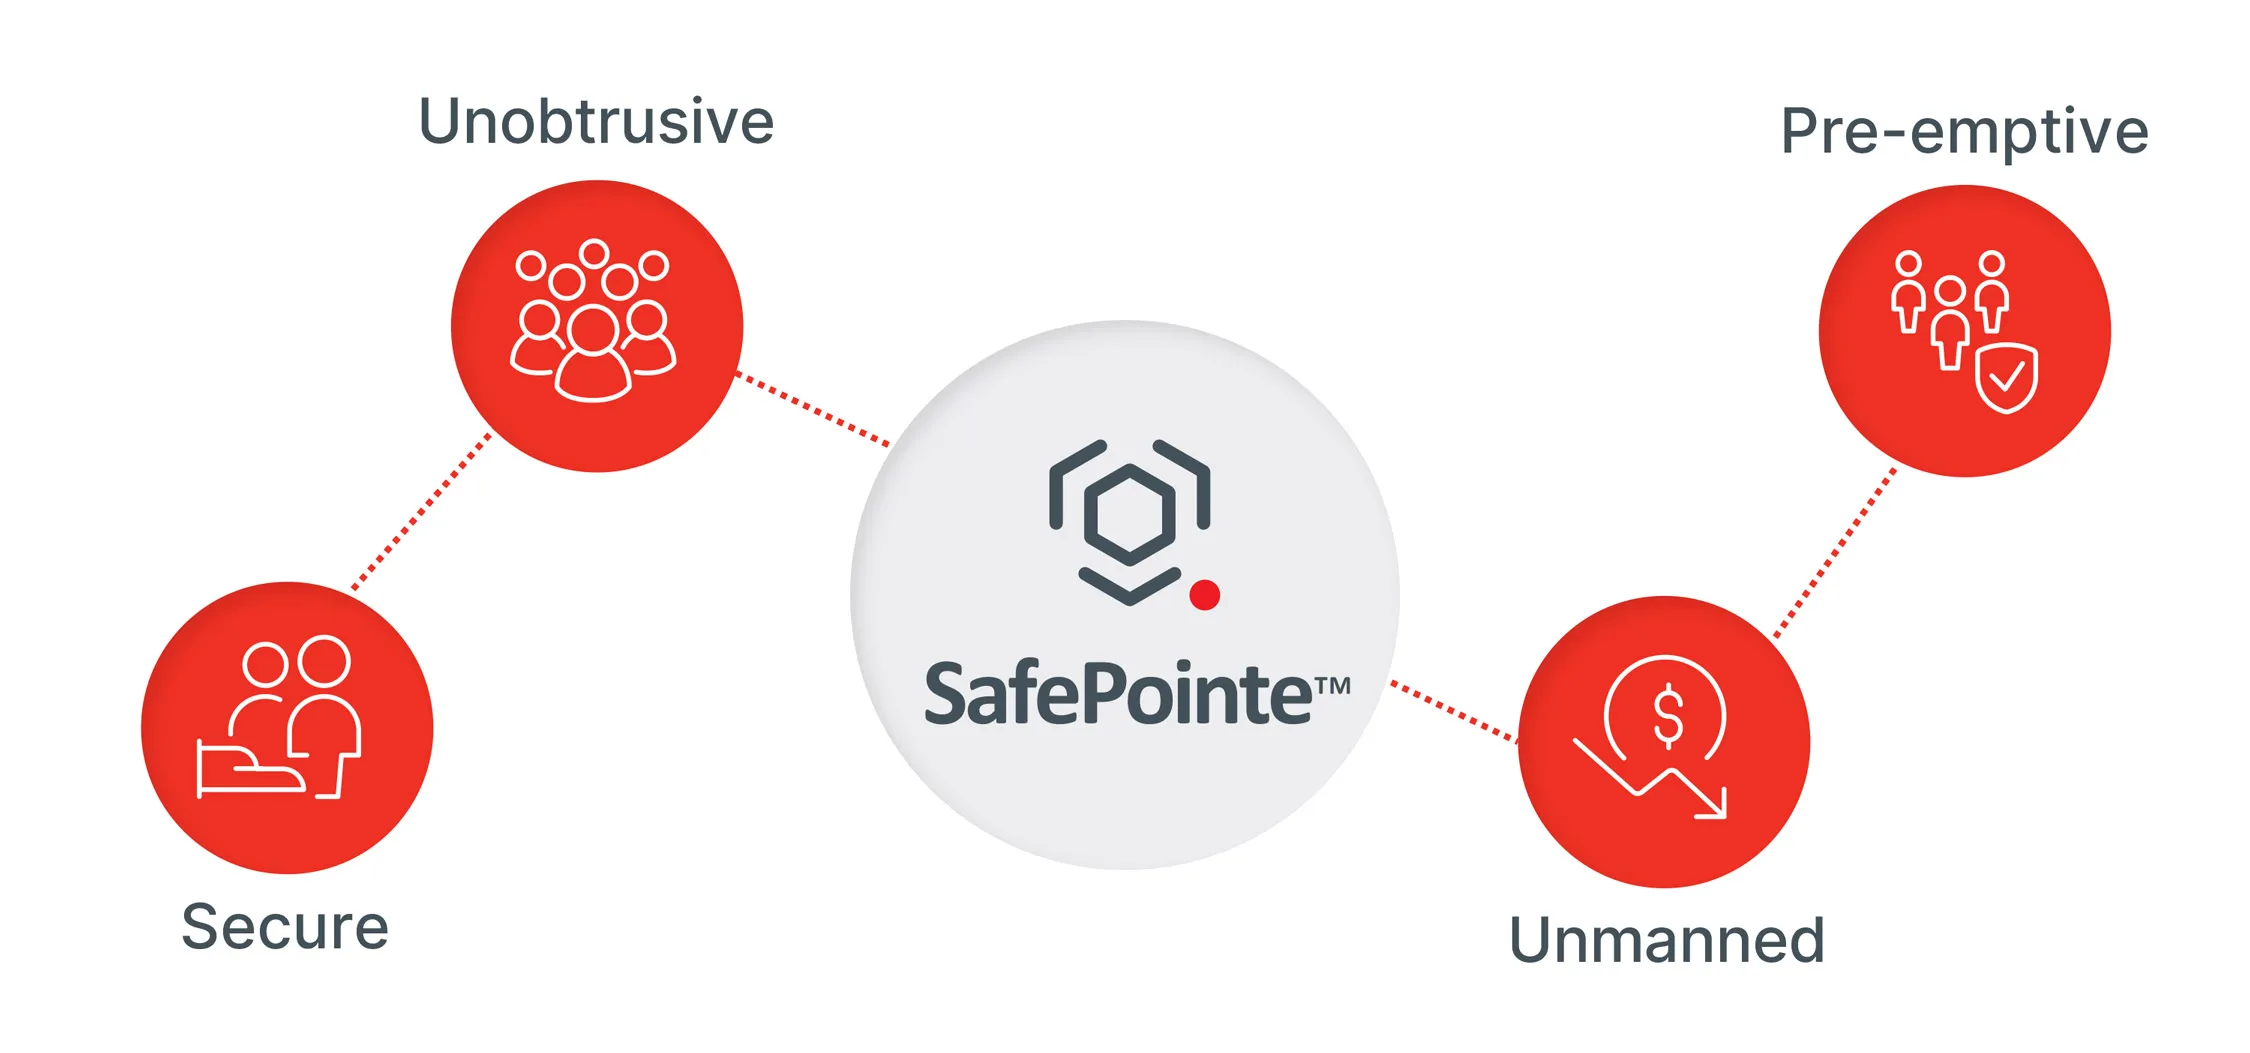 safepointe-features